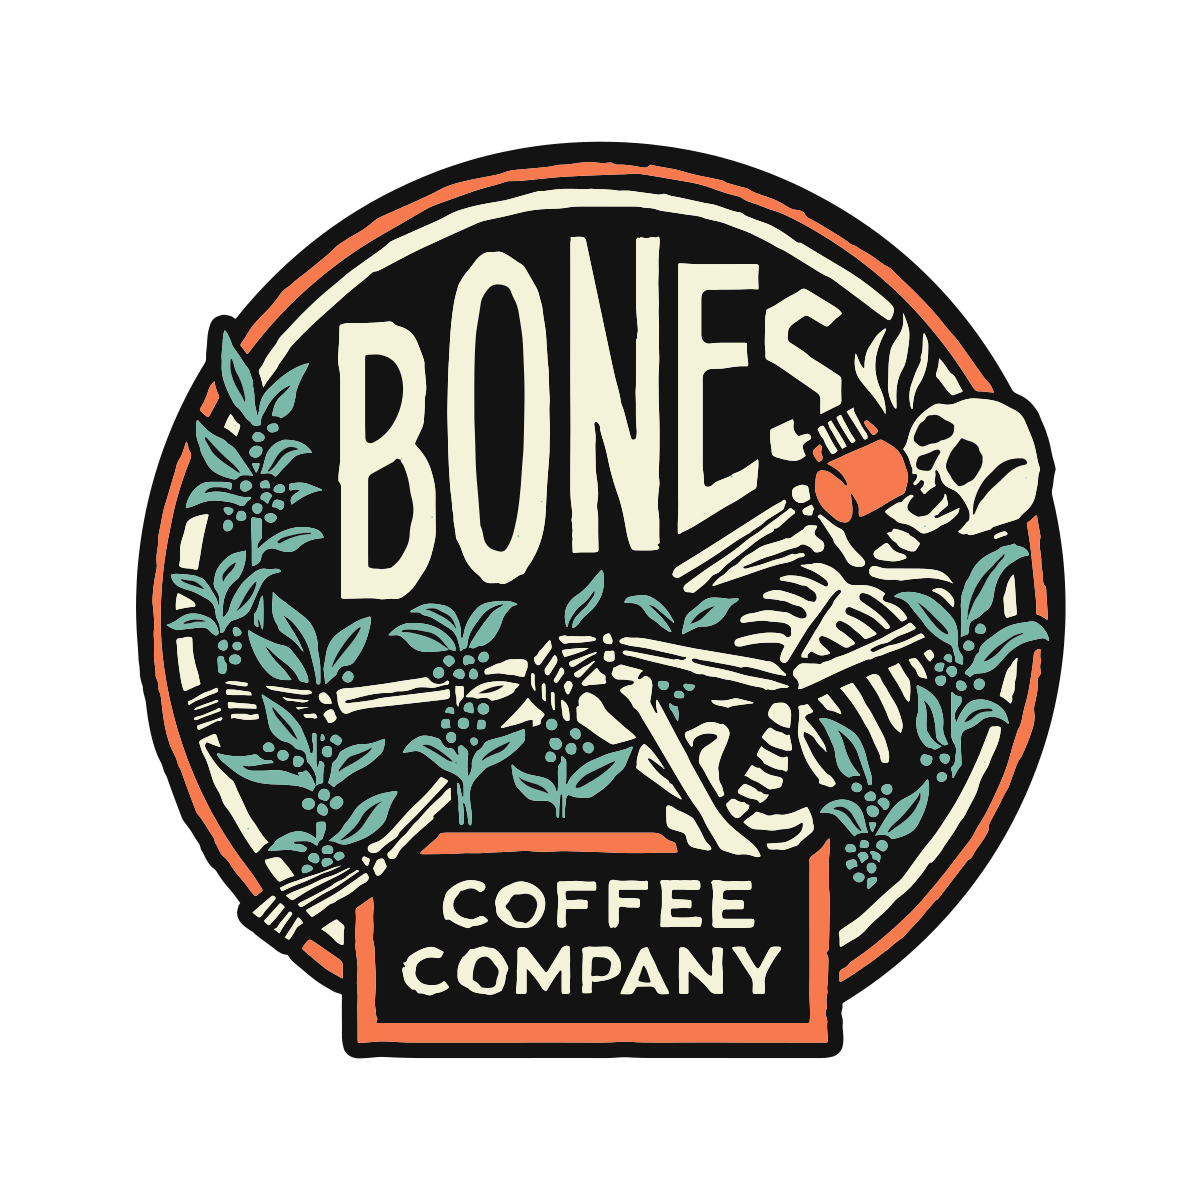 Bones Coffee Company logo, showing a skeleton leaning back and drinking a cup of coffee, surrounded by greenery